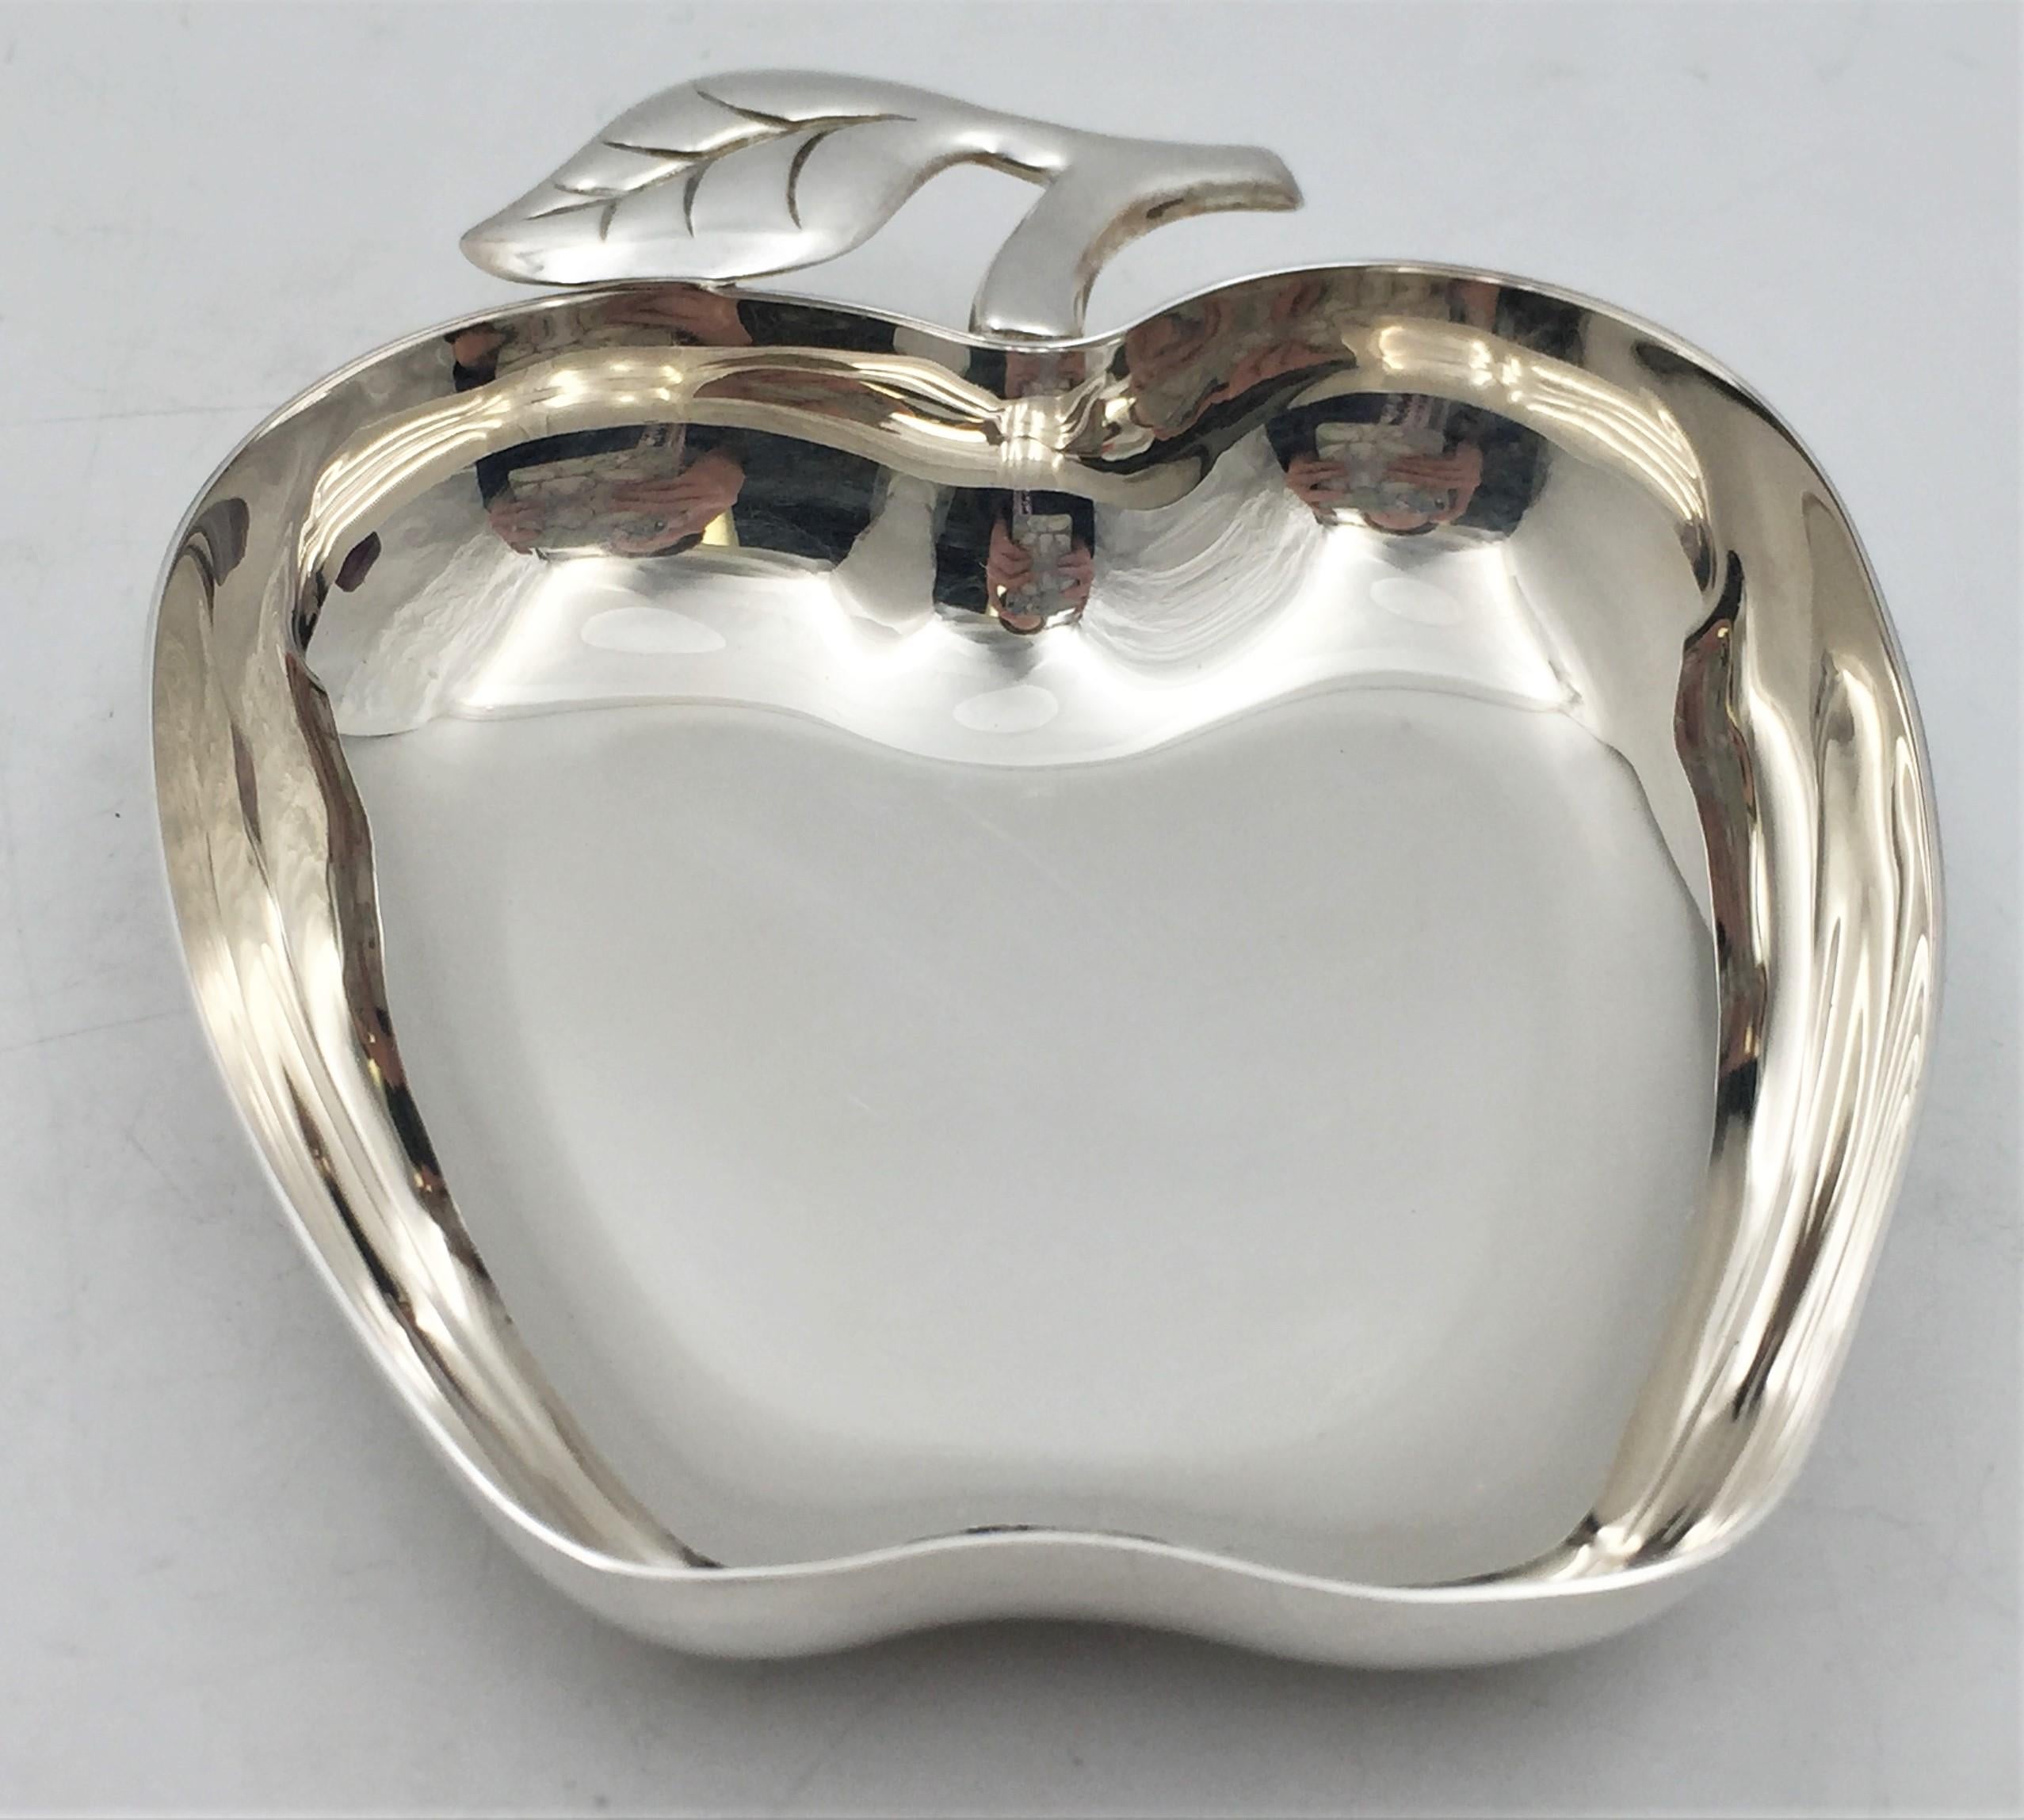 Tiffany & Co. sterling silver honey dish in pattern number 25842 from the 1950s and in Mid-Century Modern style with a beautiful geometric design. It measures 5 1/2'' in length by 4 3/4'' in width by 1 1/8'' in height, weighs 6.2 troy ounces, and